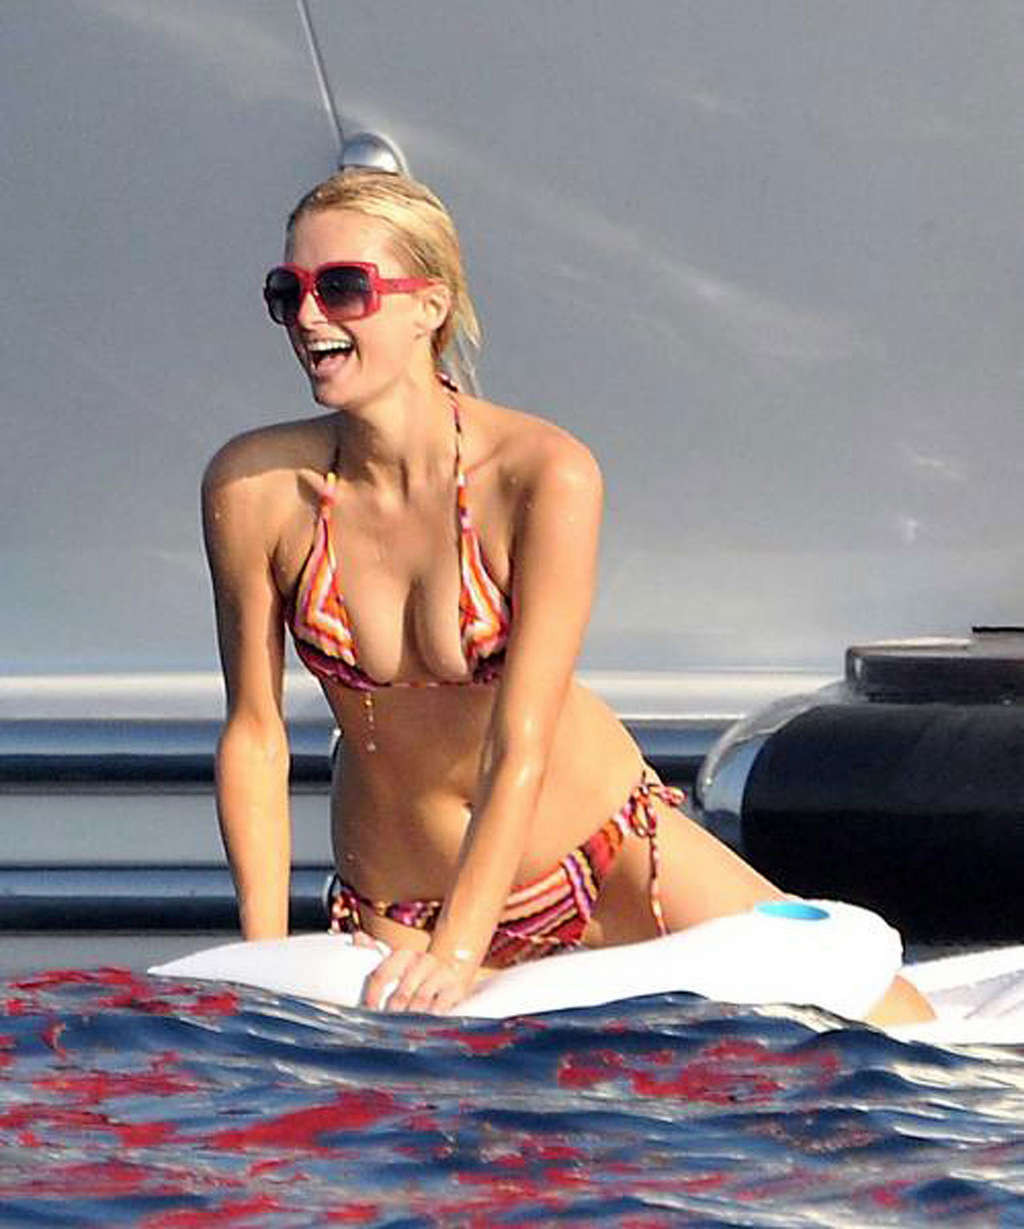 Paris Hilton enjoying on yacht in topless and showing sexy body #75340464